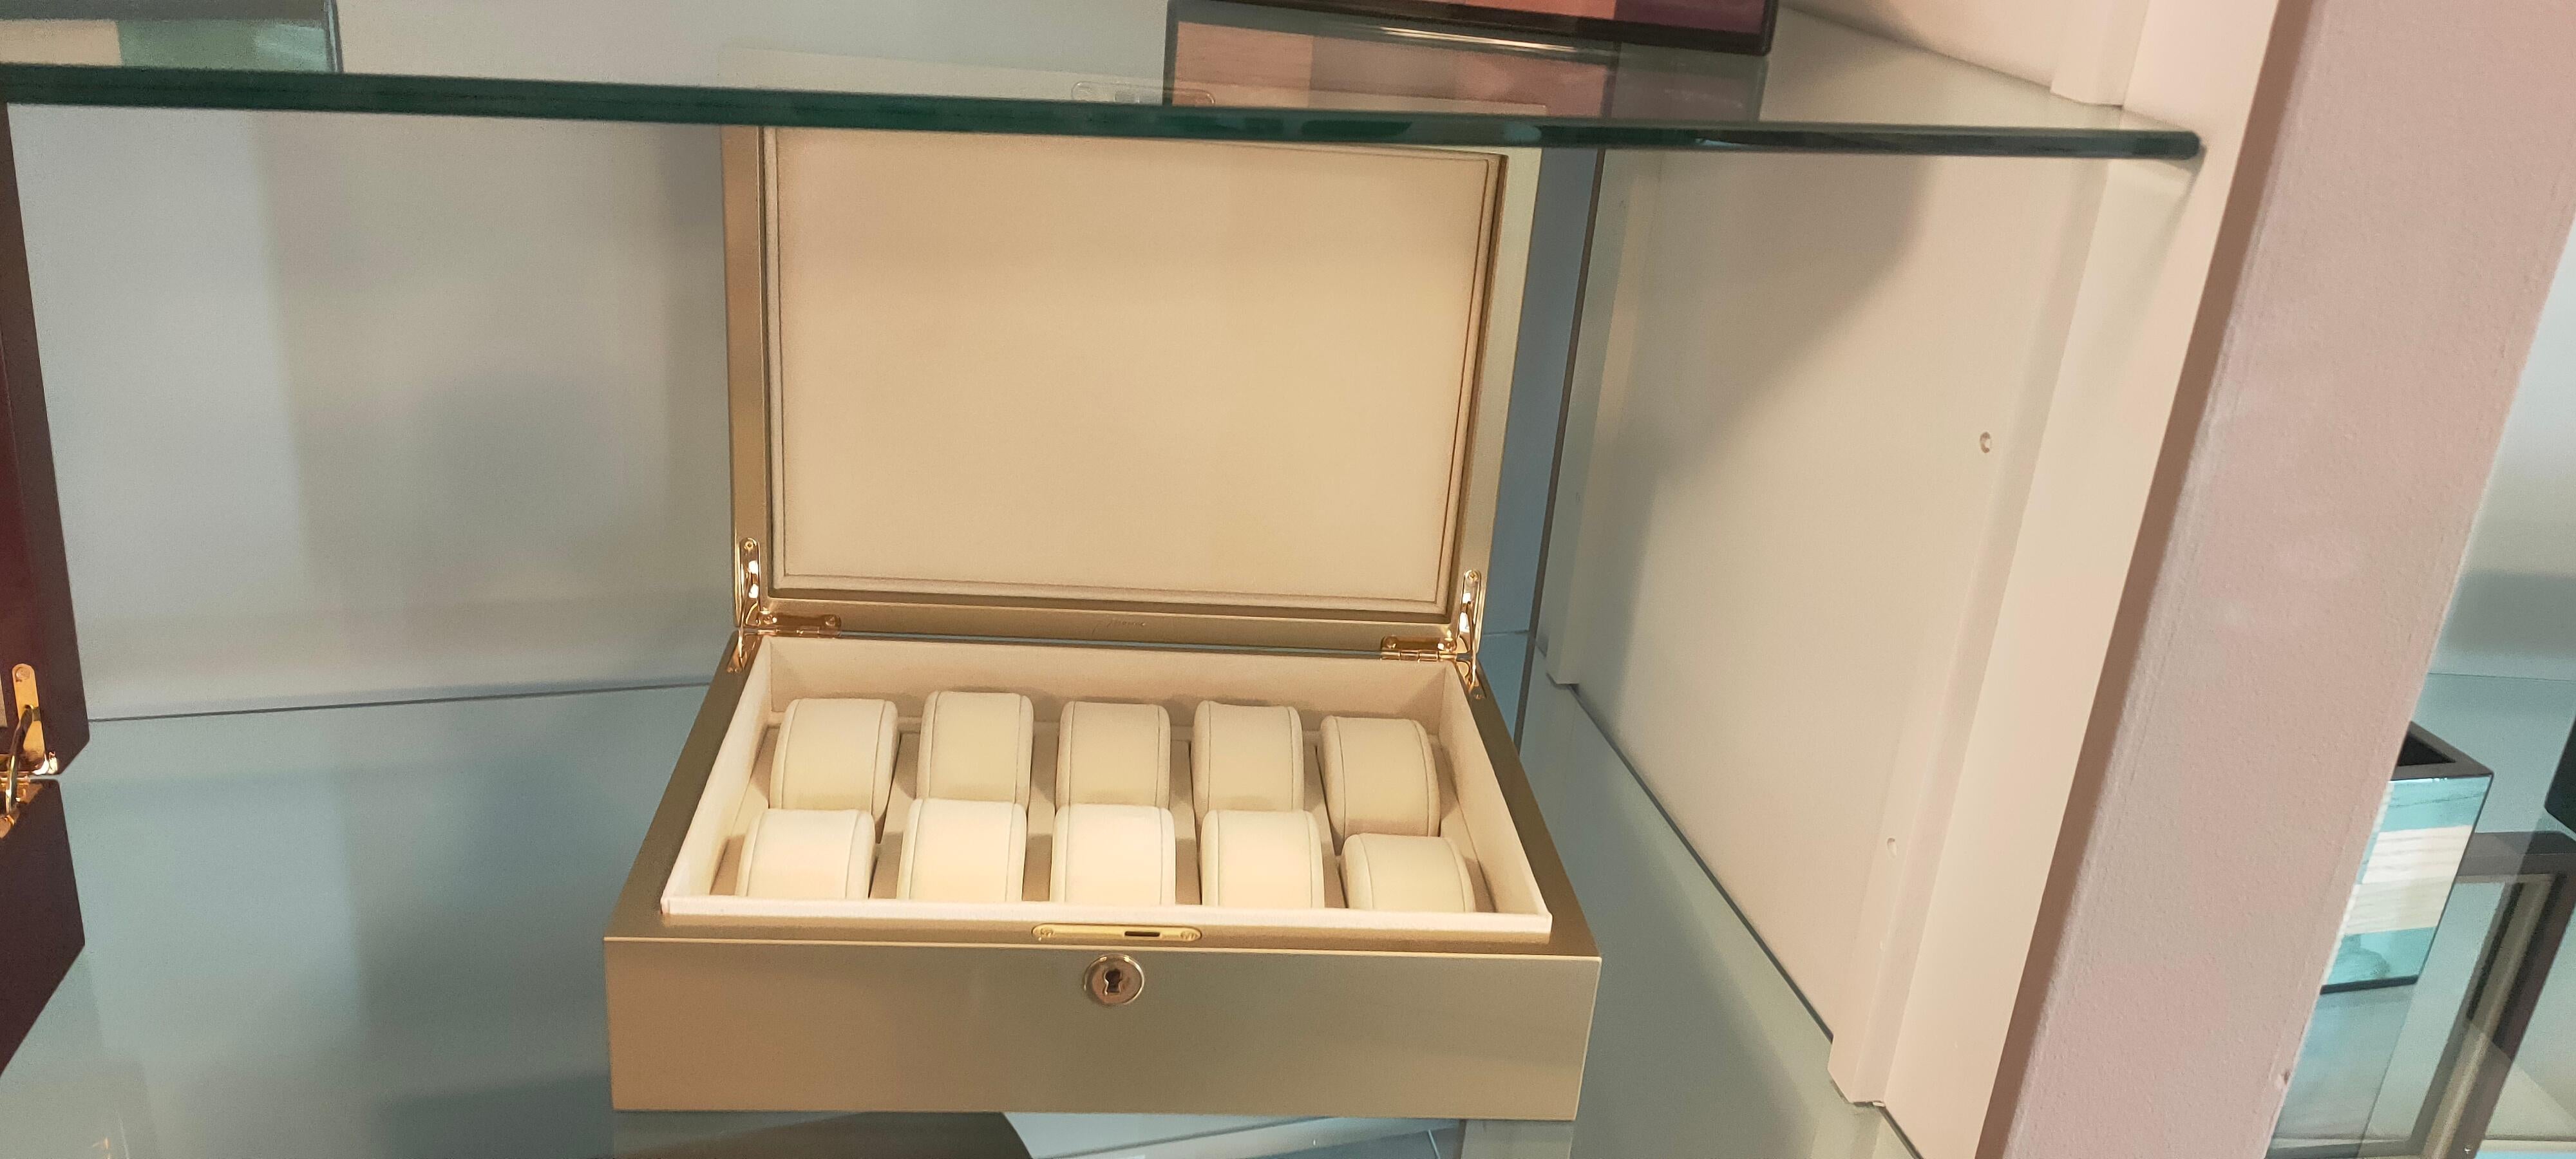 Firenze Champagne Jewerly Box In New Condition For Sale In Recanati, IT